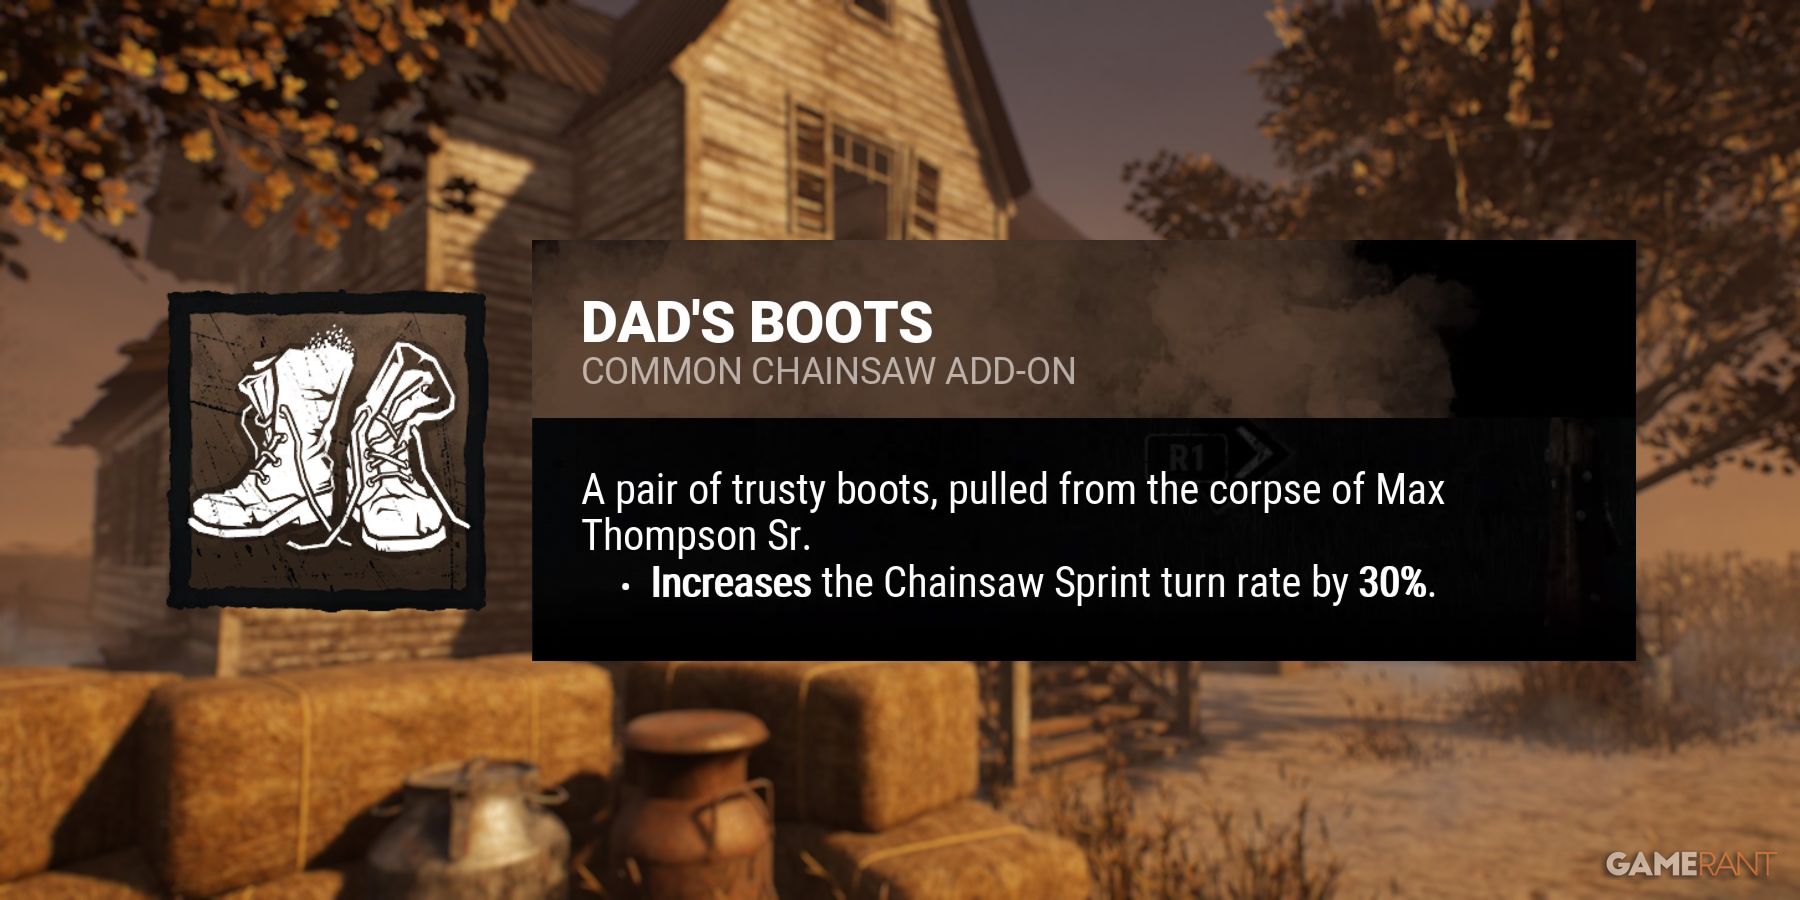 dead by daylight the hillbilly dad's boots addon